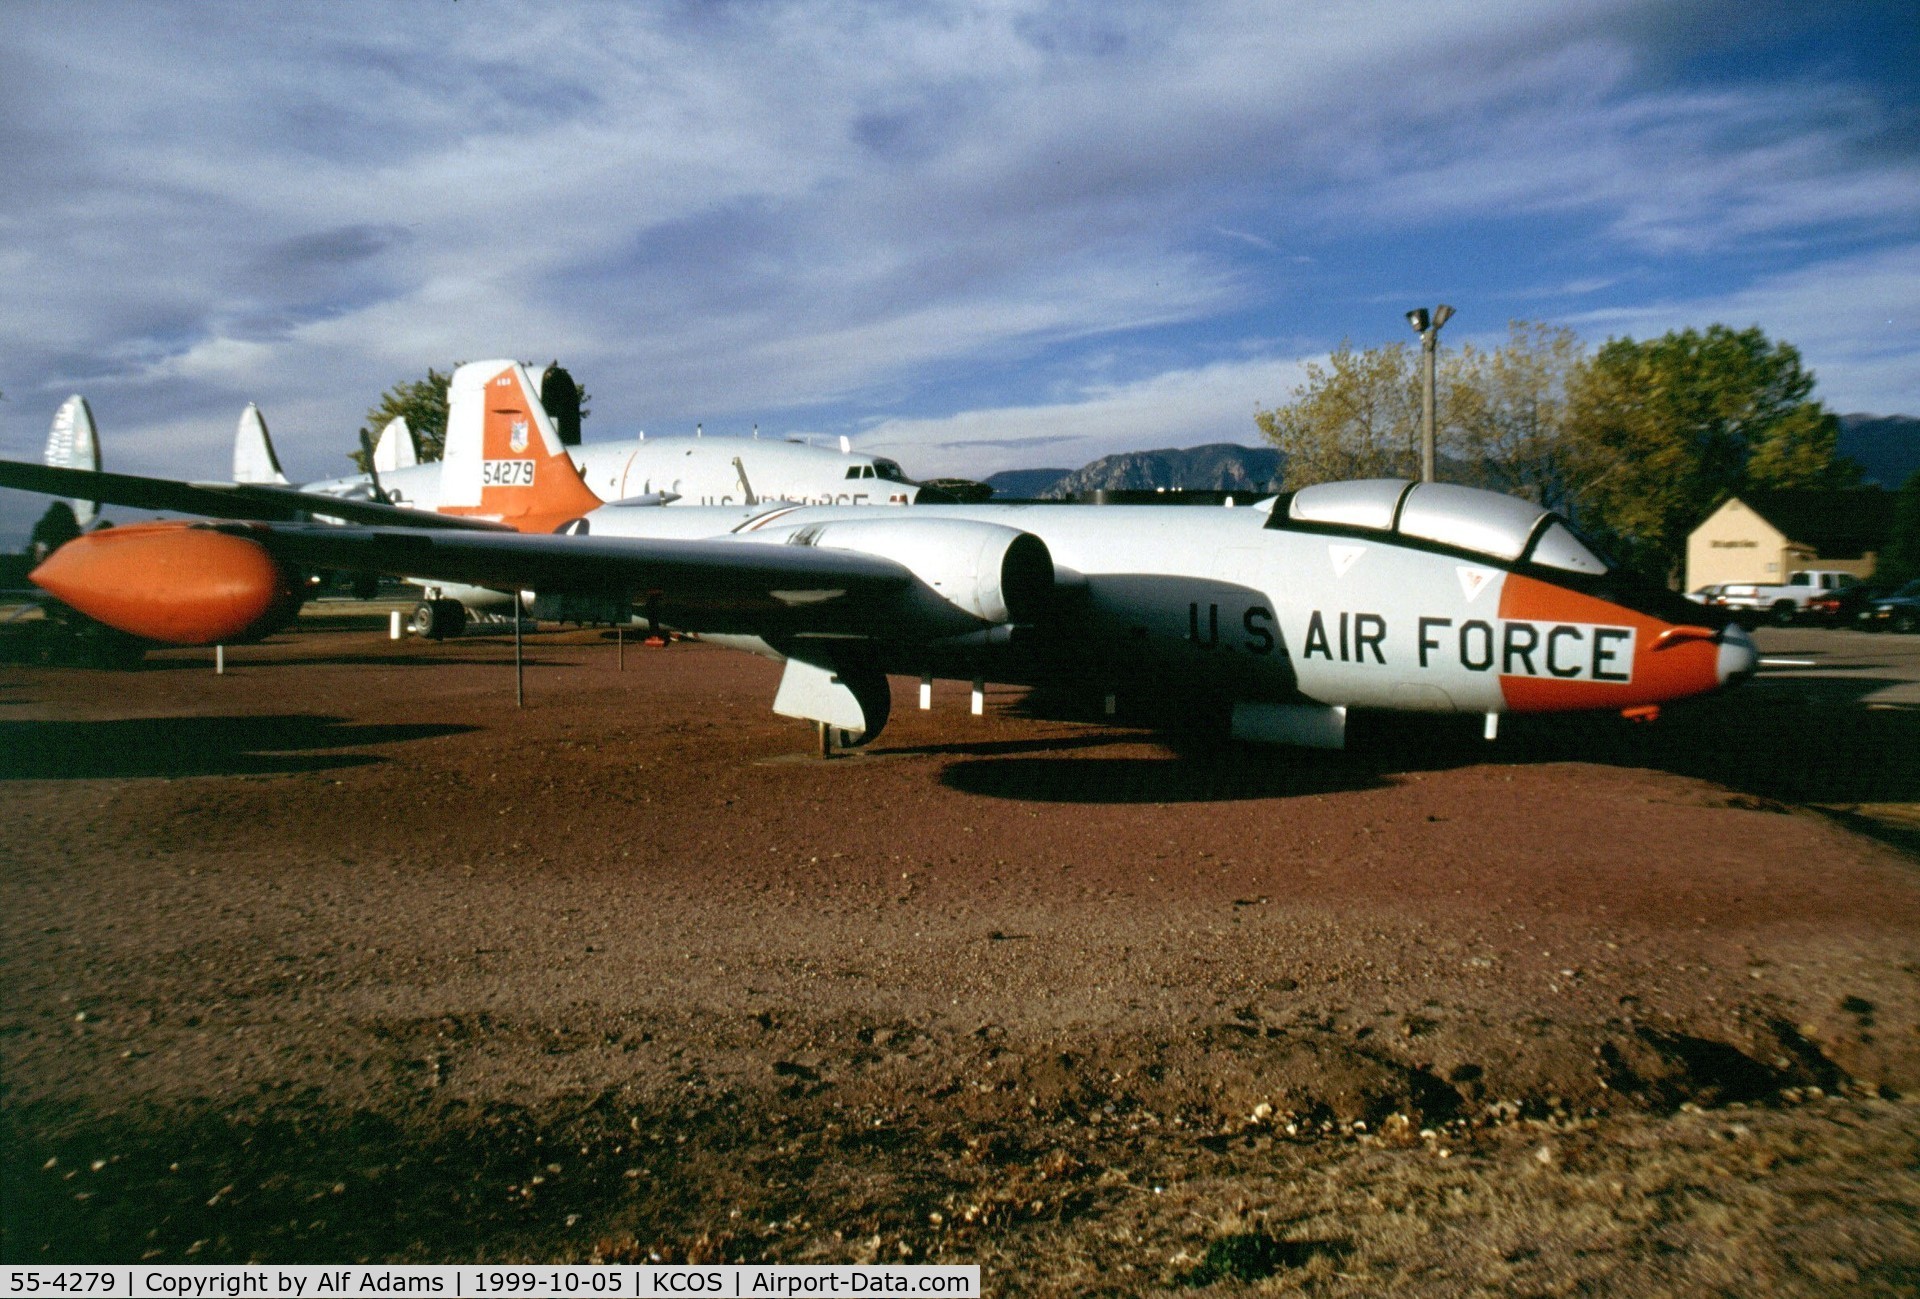 55-4279, 1955 Martin EB-57E Canberra C/N 381, Displayed at the NORAD Museum on Peterson Air Force Base, Colorado Springs, Colorado in 1999.